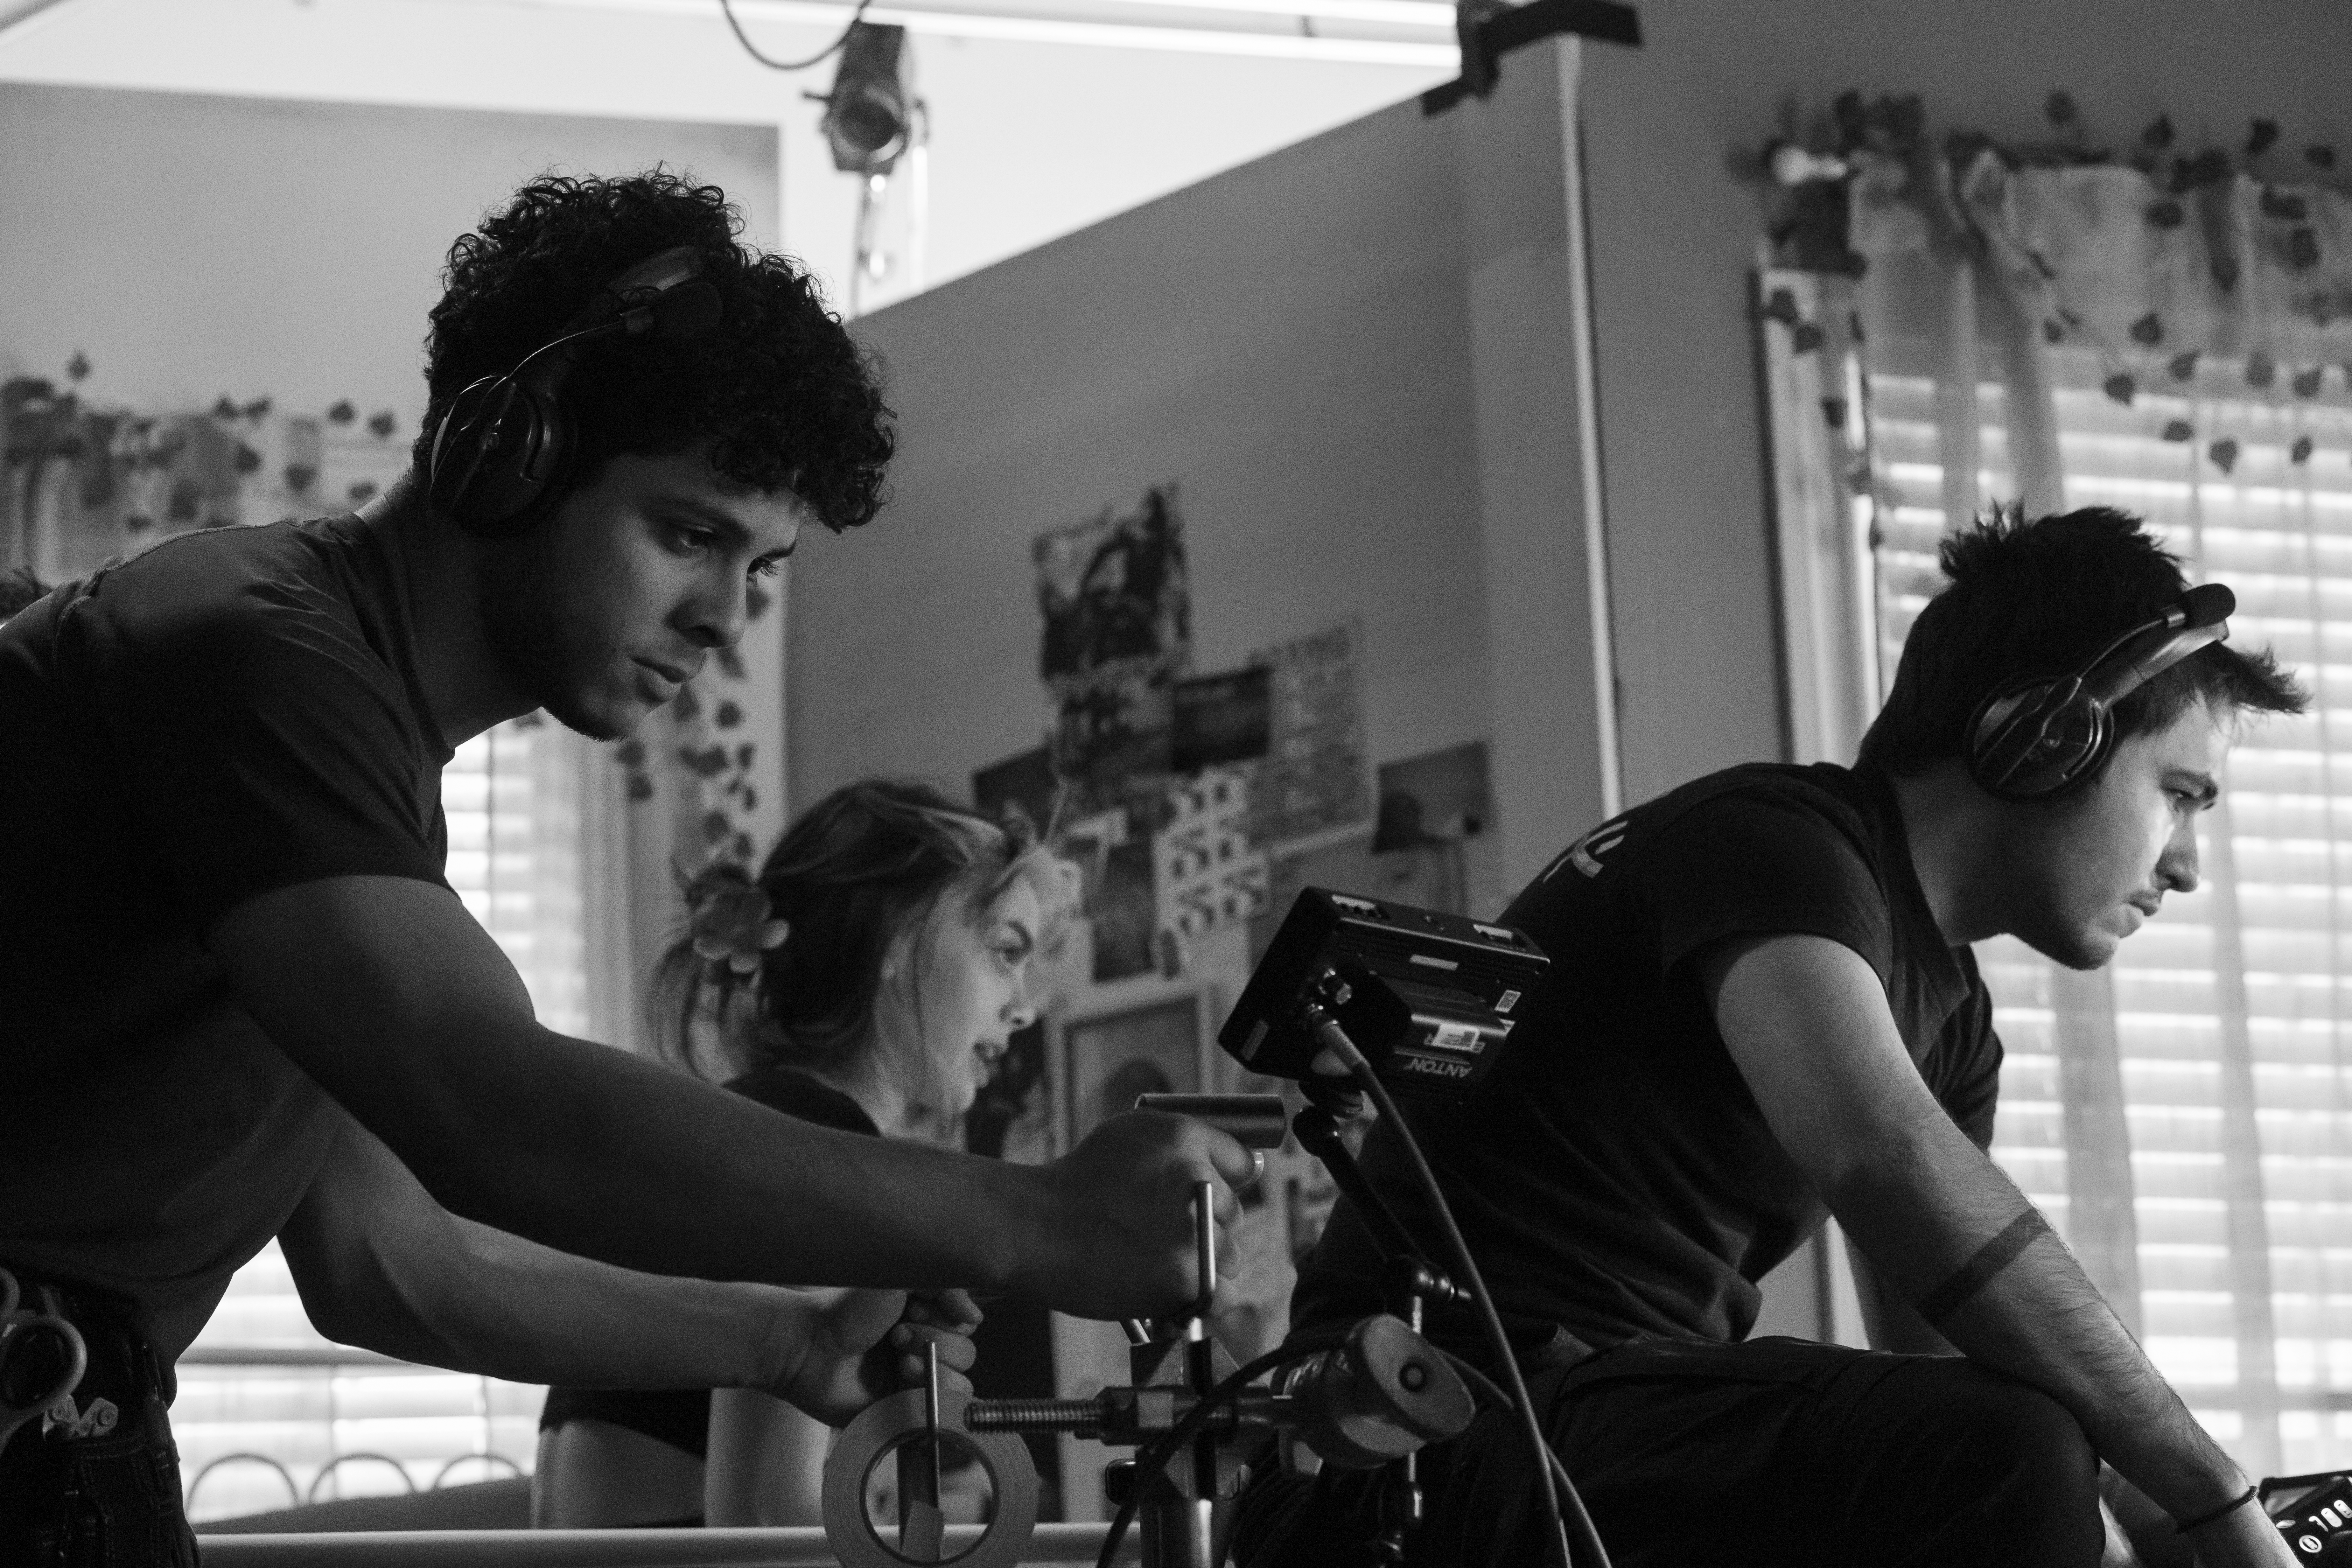 behind the scenes on Liane's film shows two crew members preparing for a shot.